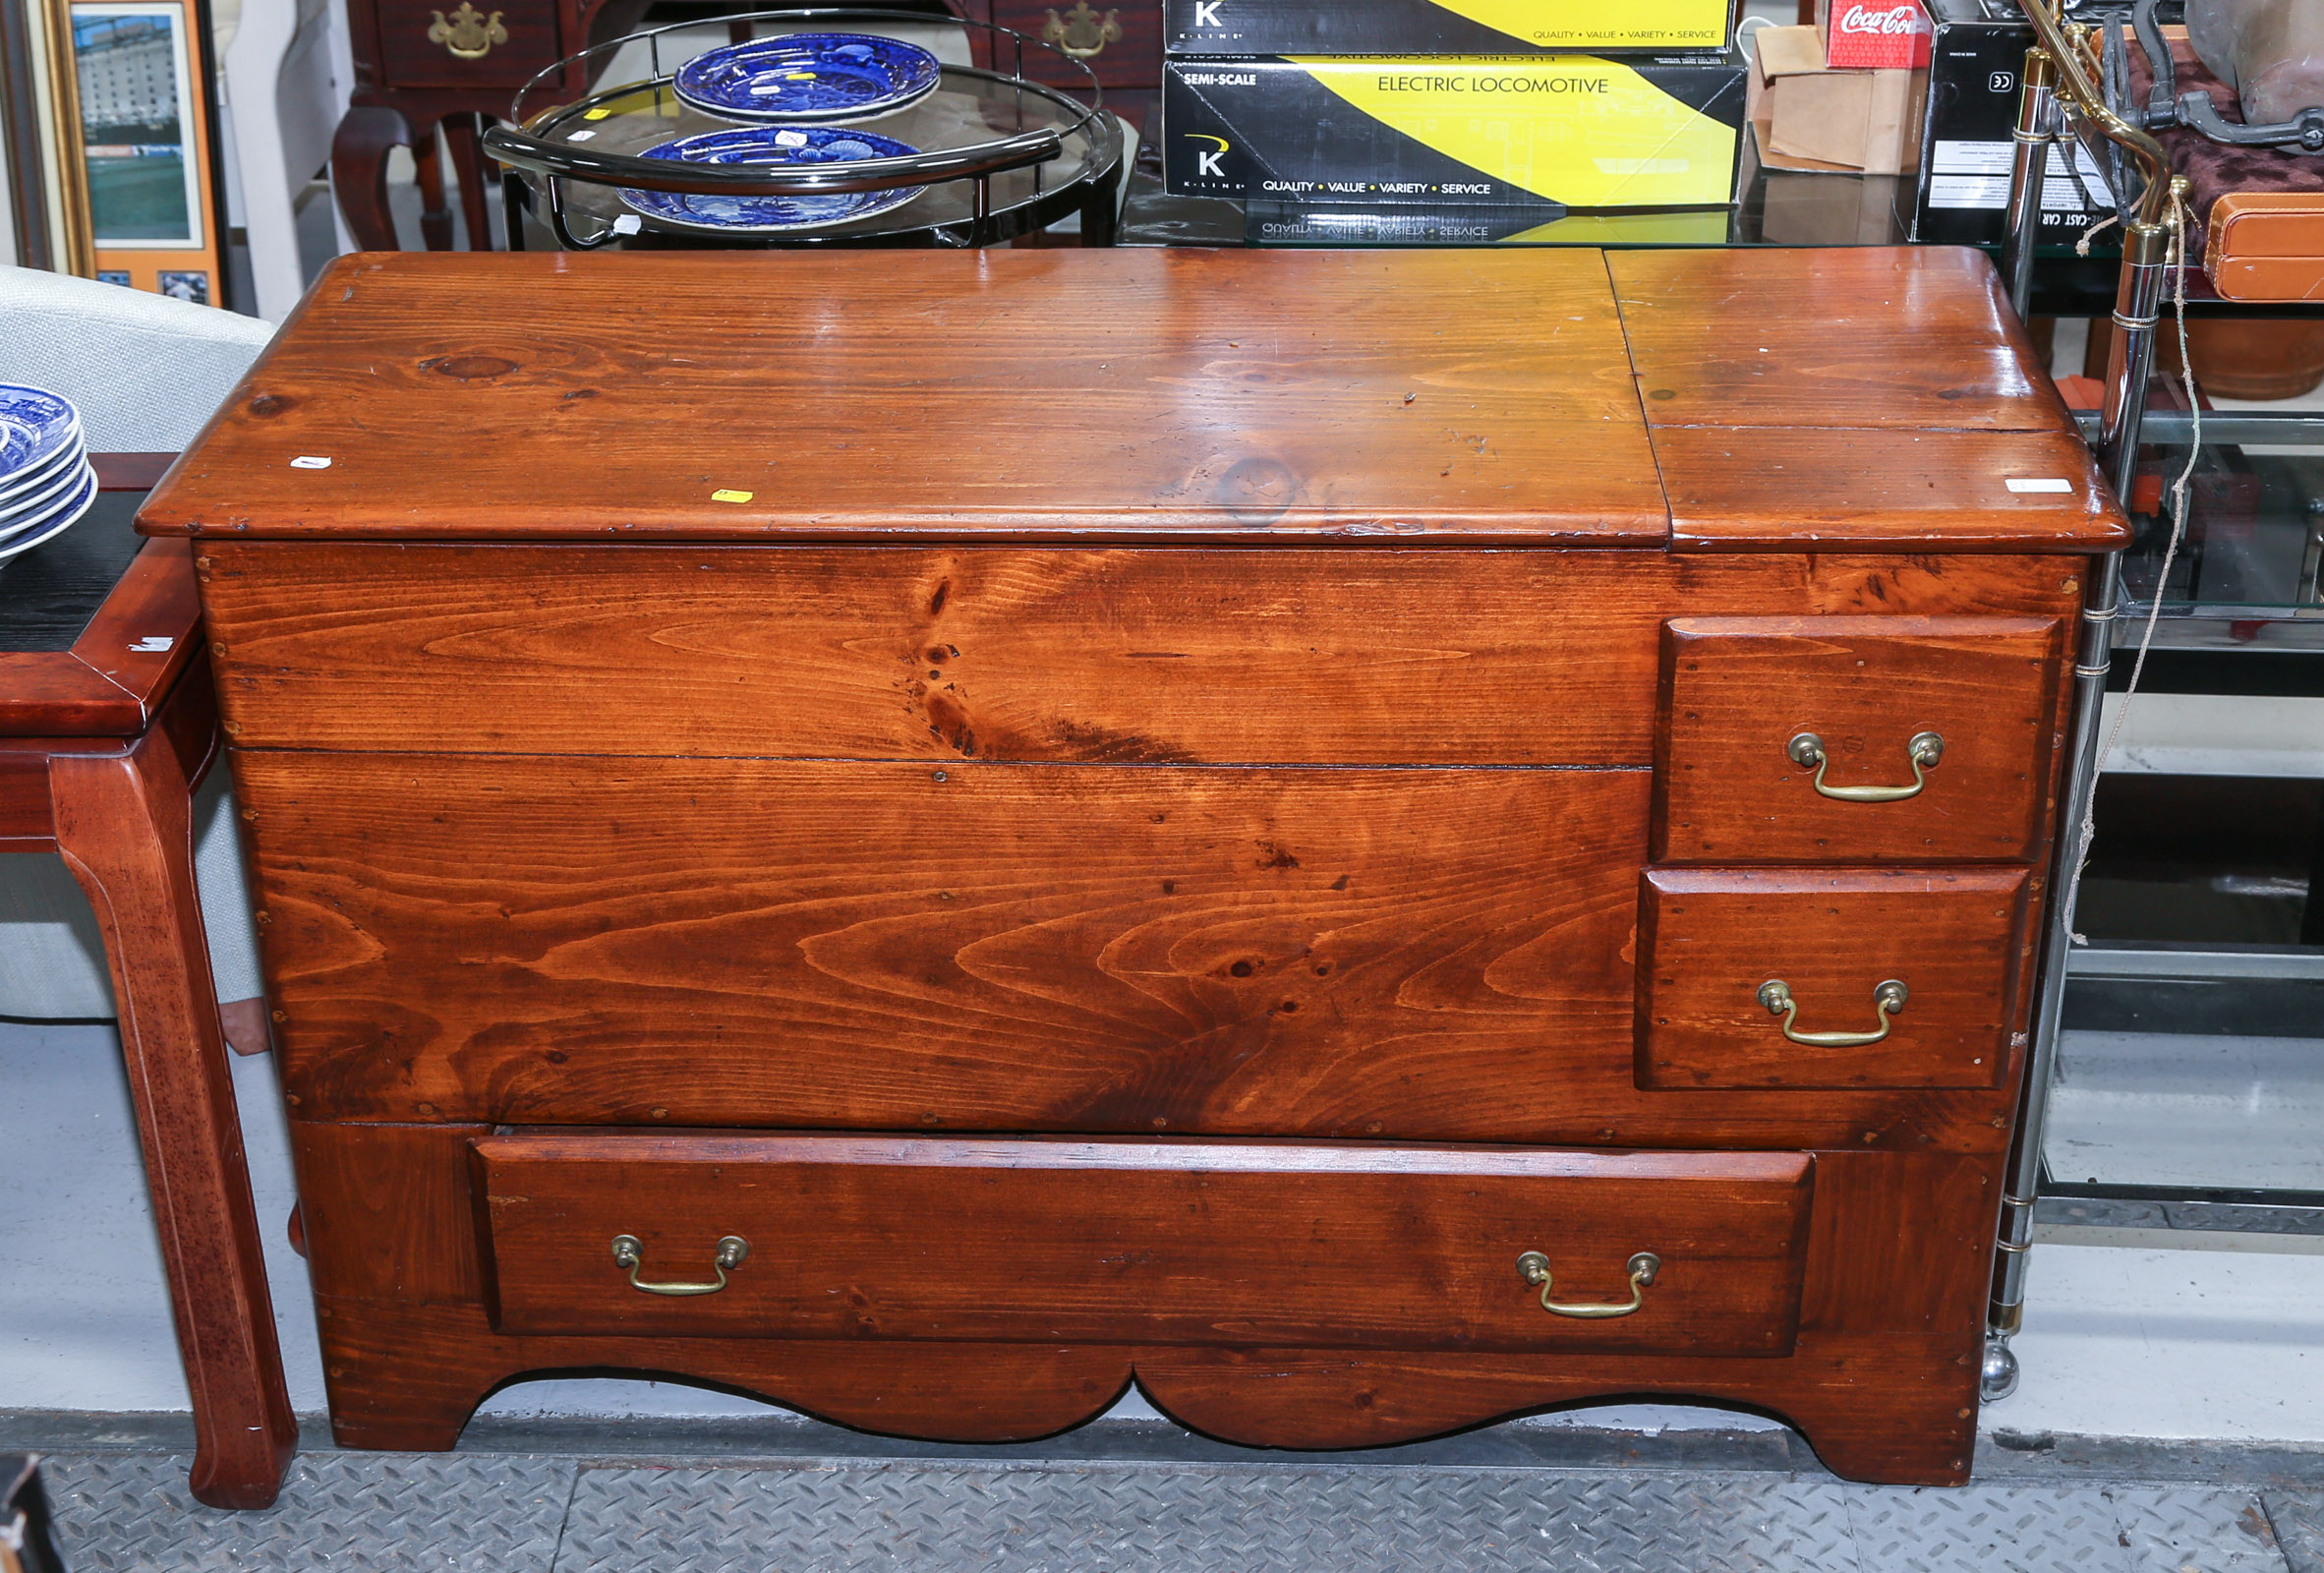 COLONIAL STYLE PINE BLANKET CHEST 2ea25c